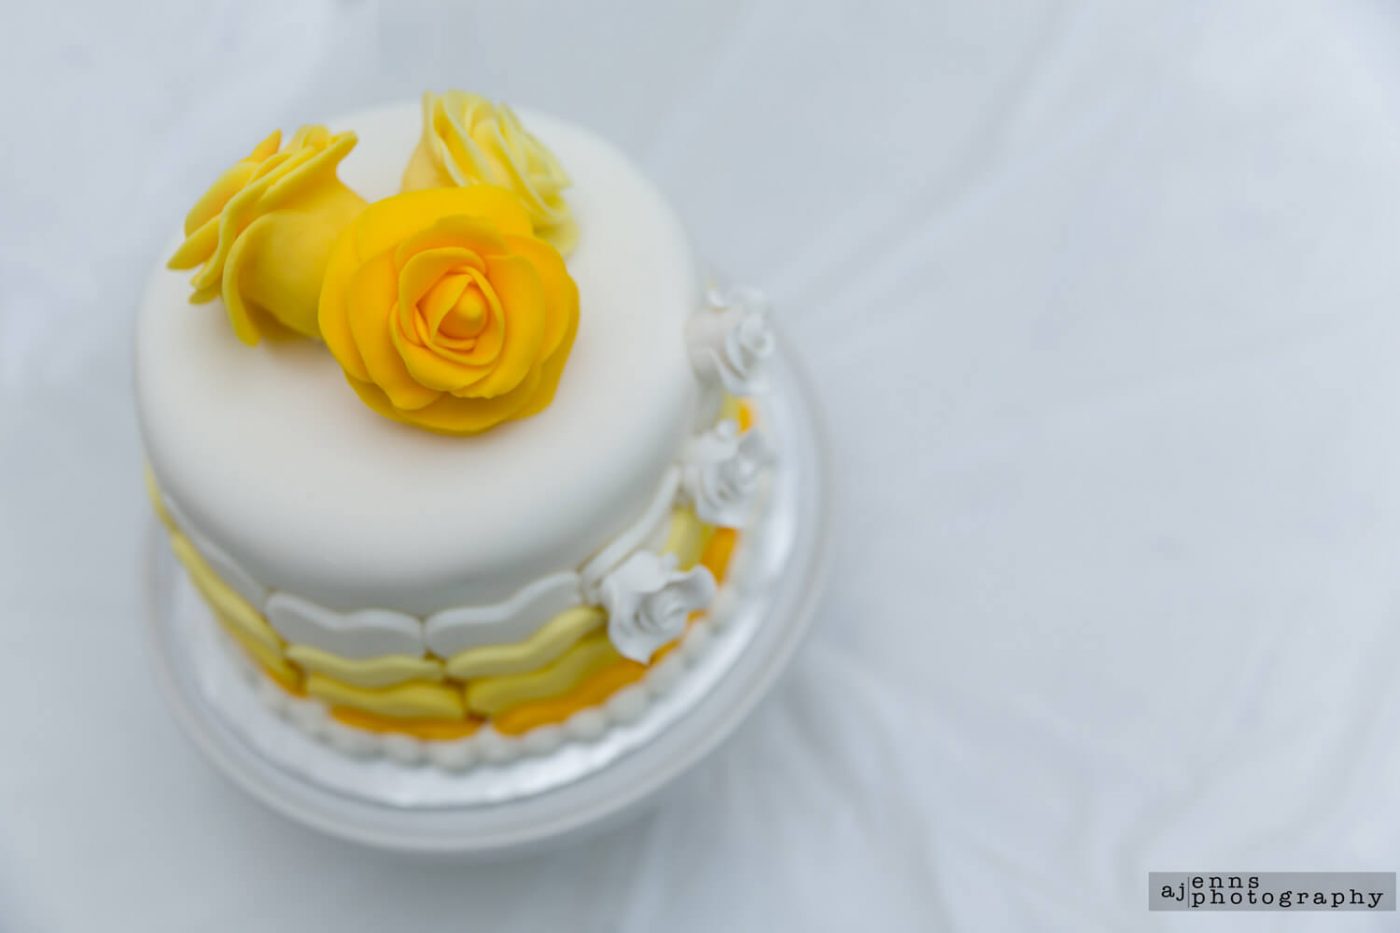 Top view of the 3 shades of yellow wedding cake